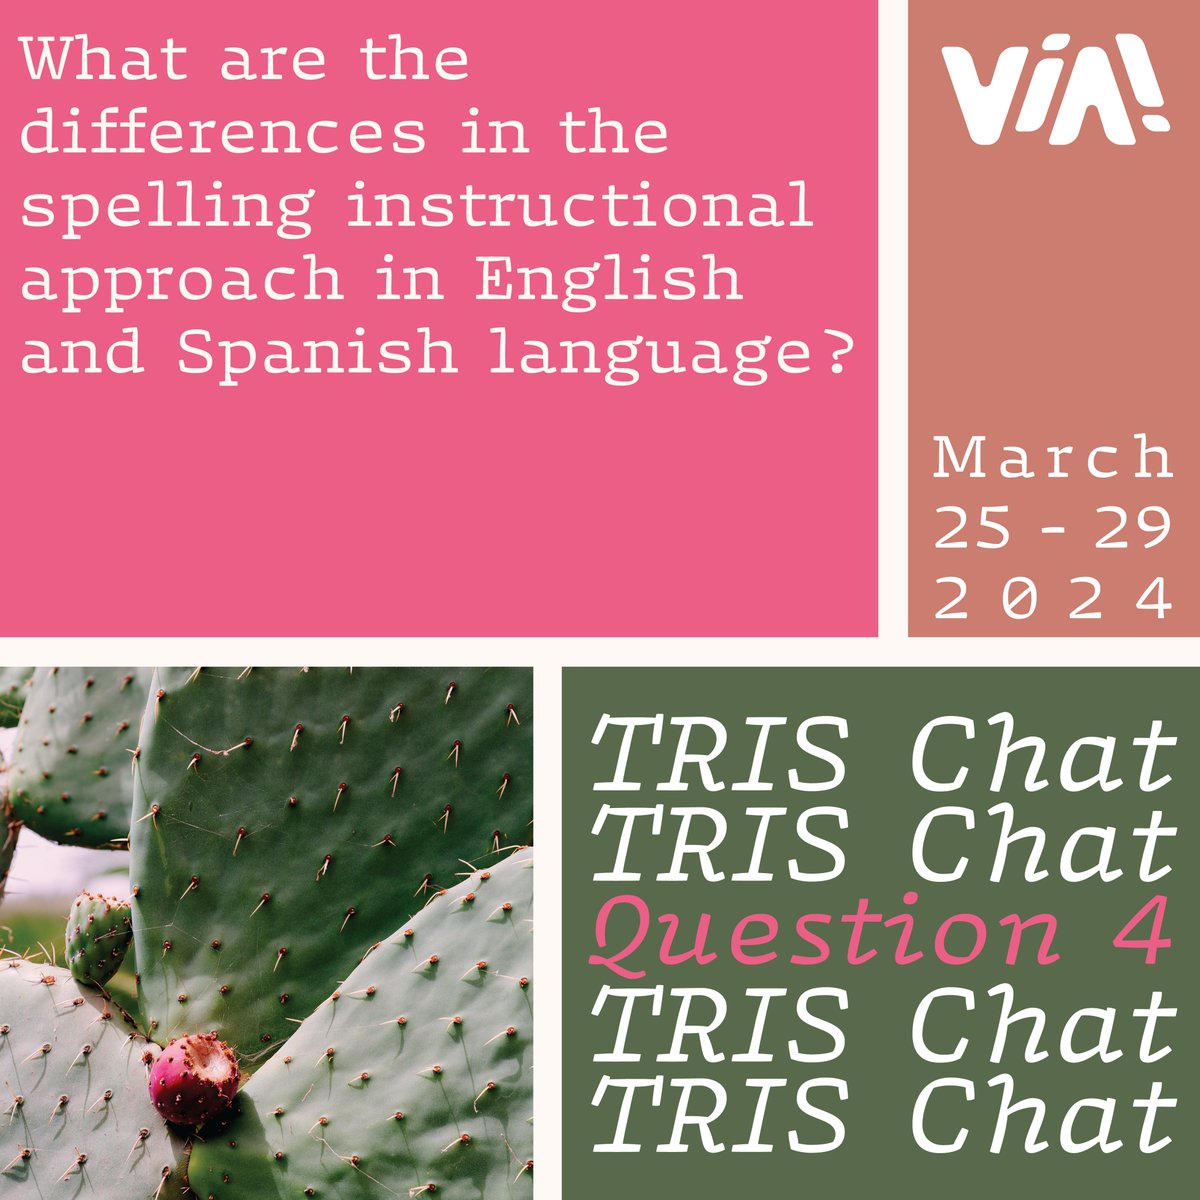 Q4: What are the differences in the spelling instructional approach in English and Spanish language? #TRISchat